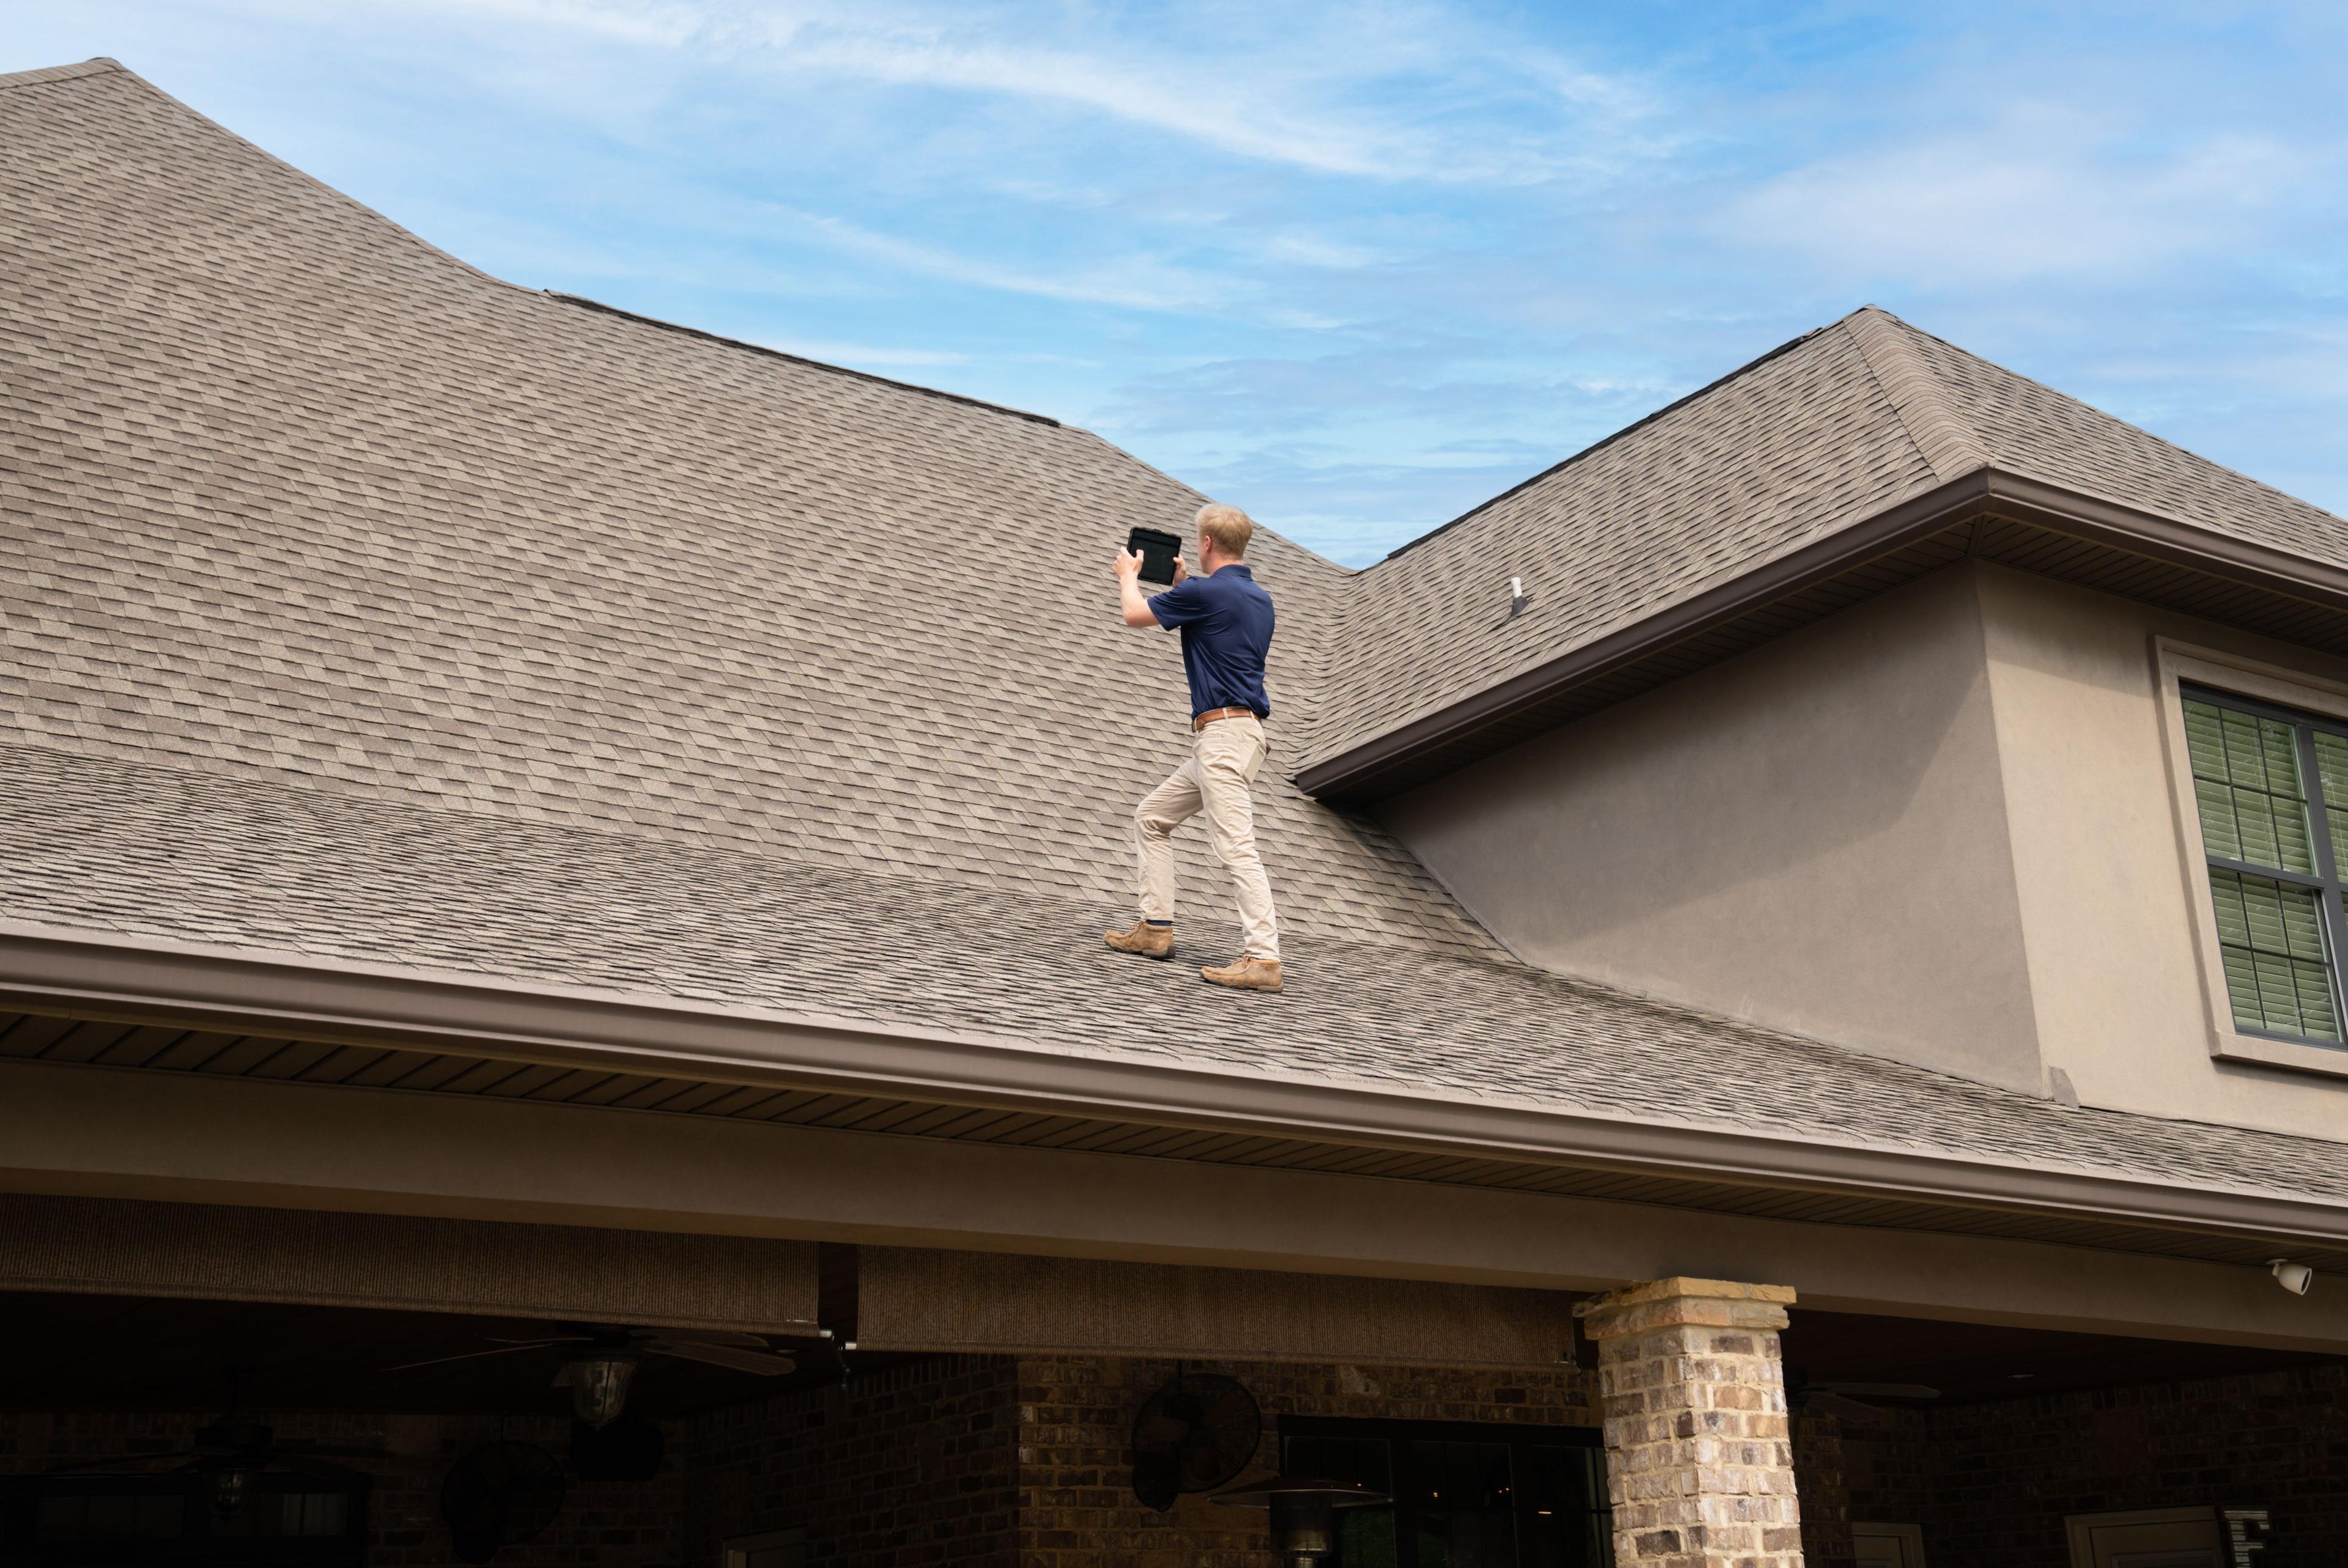 Home Inspector inspecting the roof of a house using a tablet device